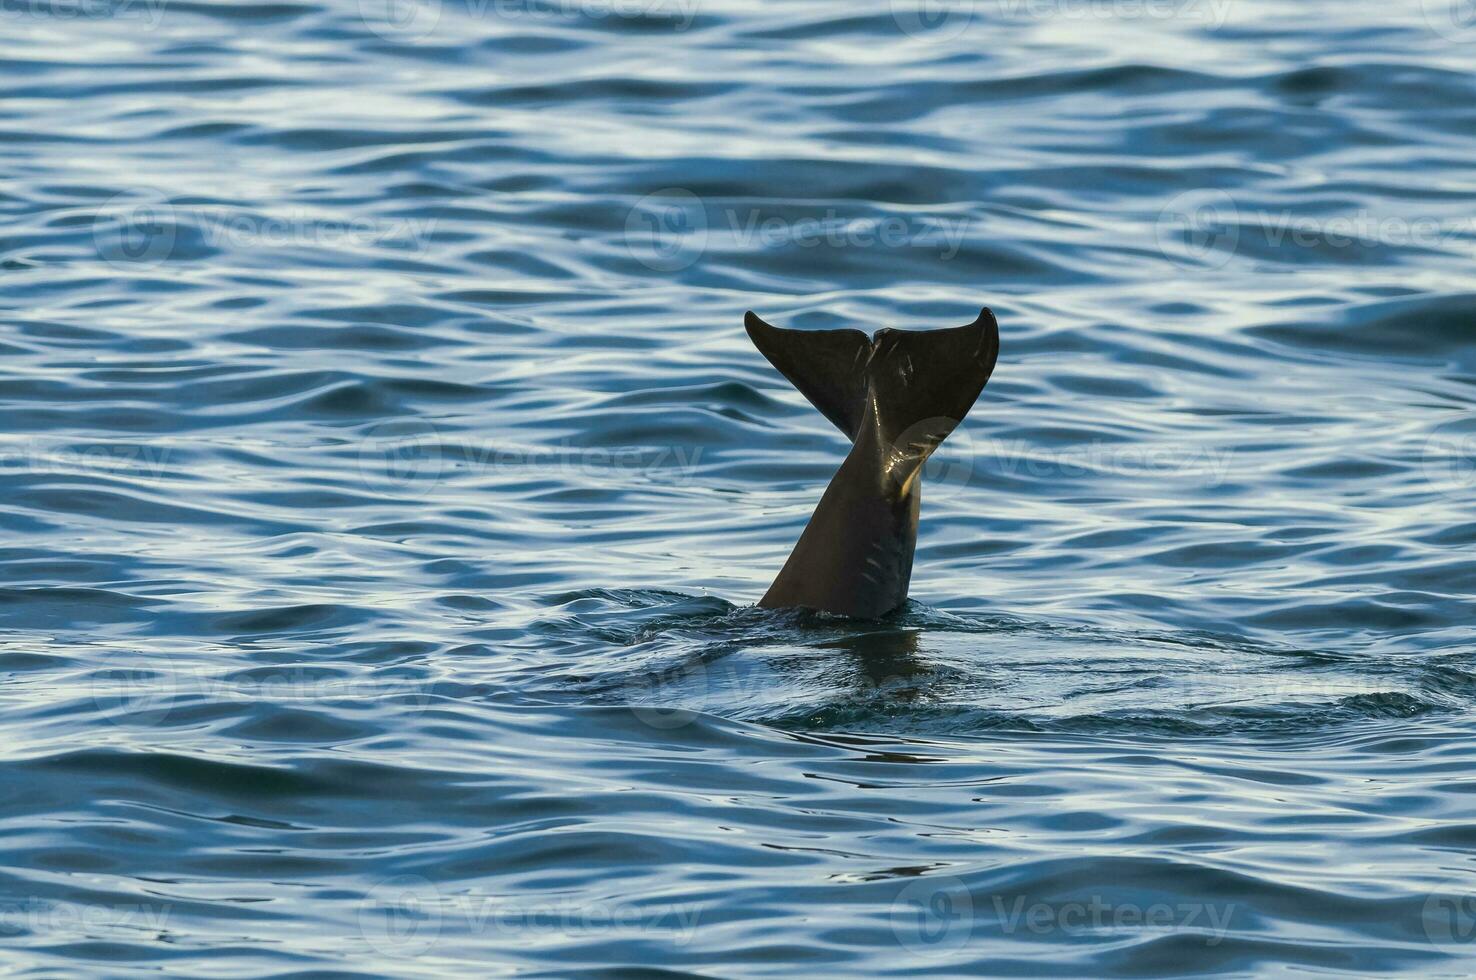 Killer Whale tail , Orca, hunting a sea lion pup, Peninsula Valdes, Patagonia Argentina photo